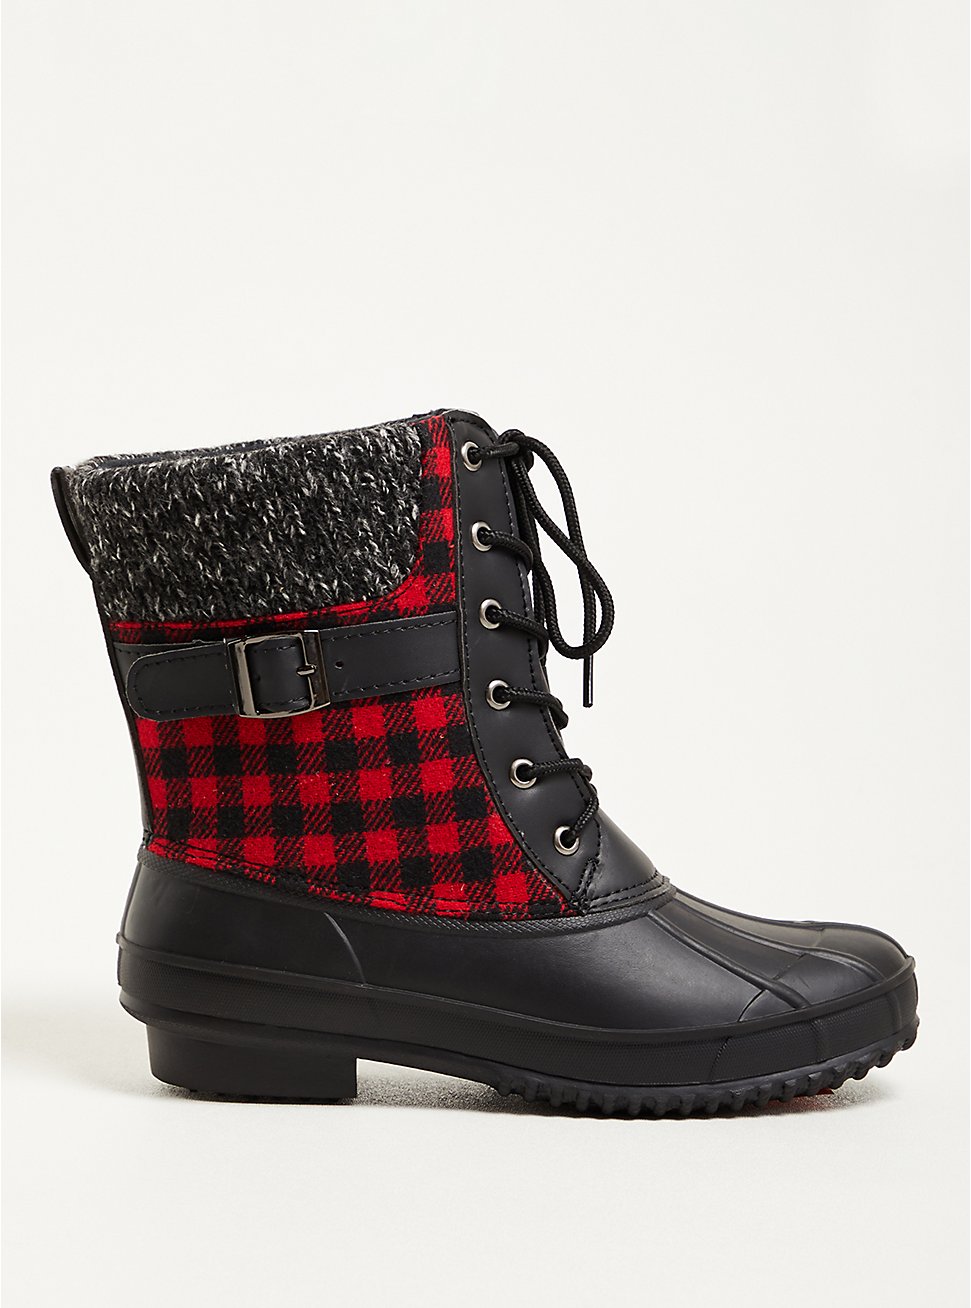 Plus Size Water Resistant All Weather Bootie - Red Flannel (WW), RED, hi-res